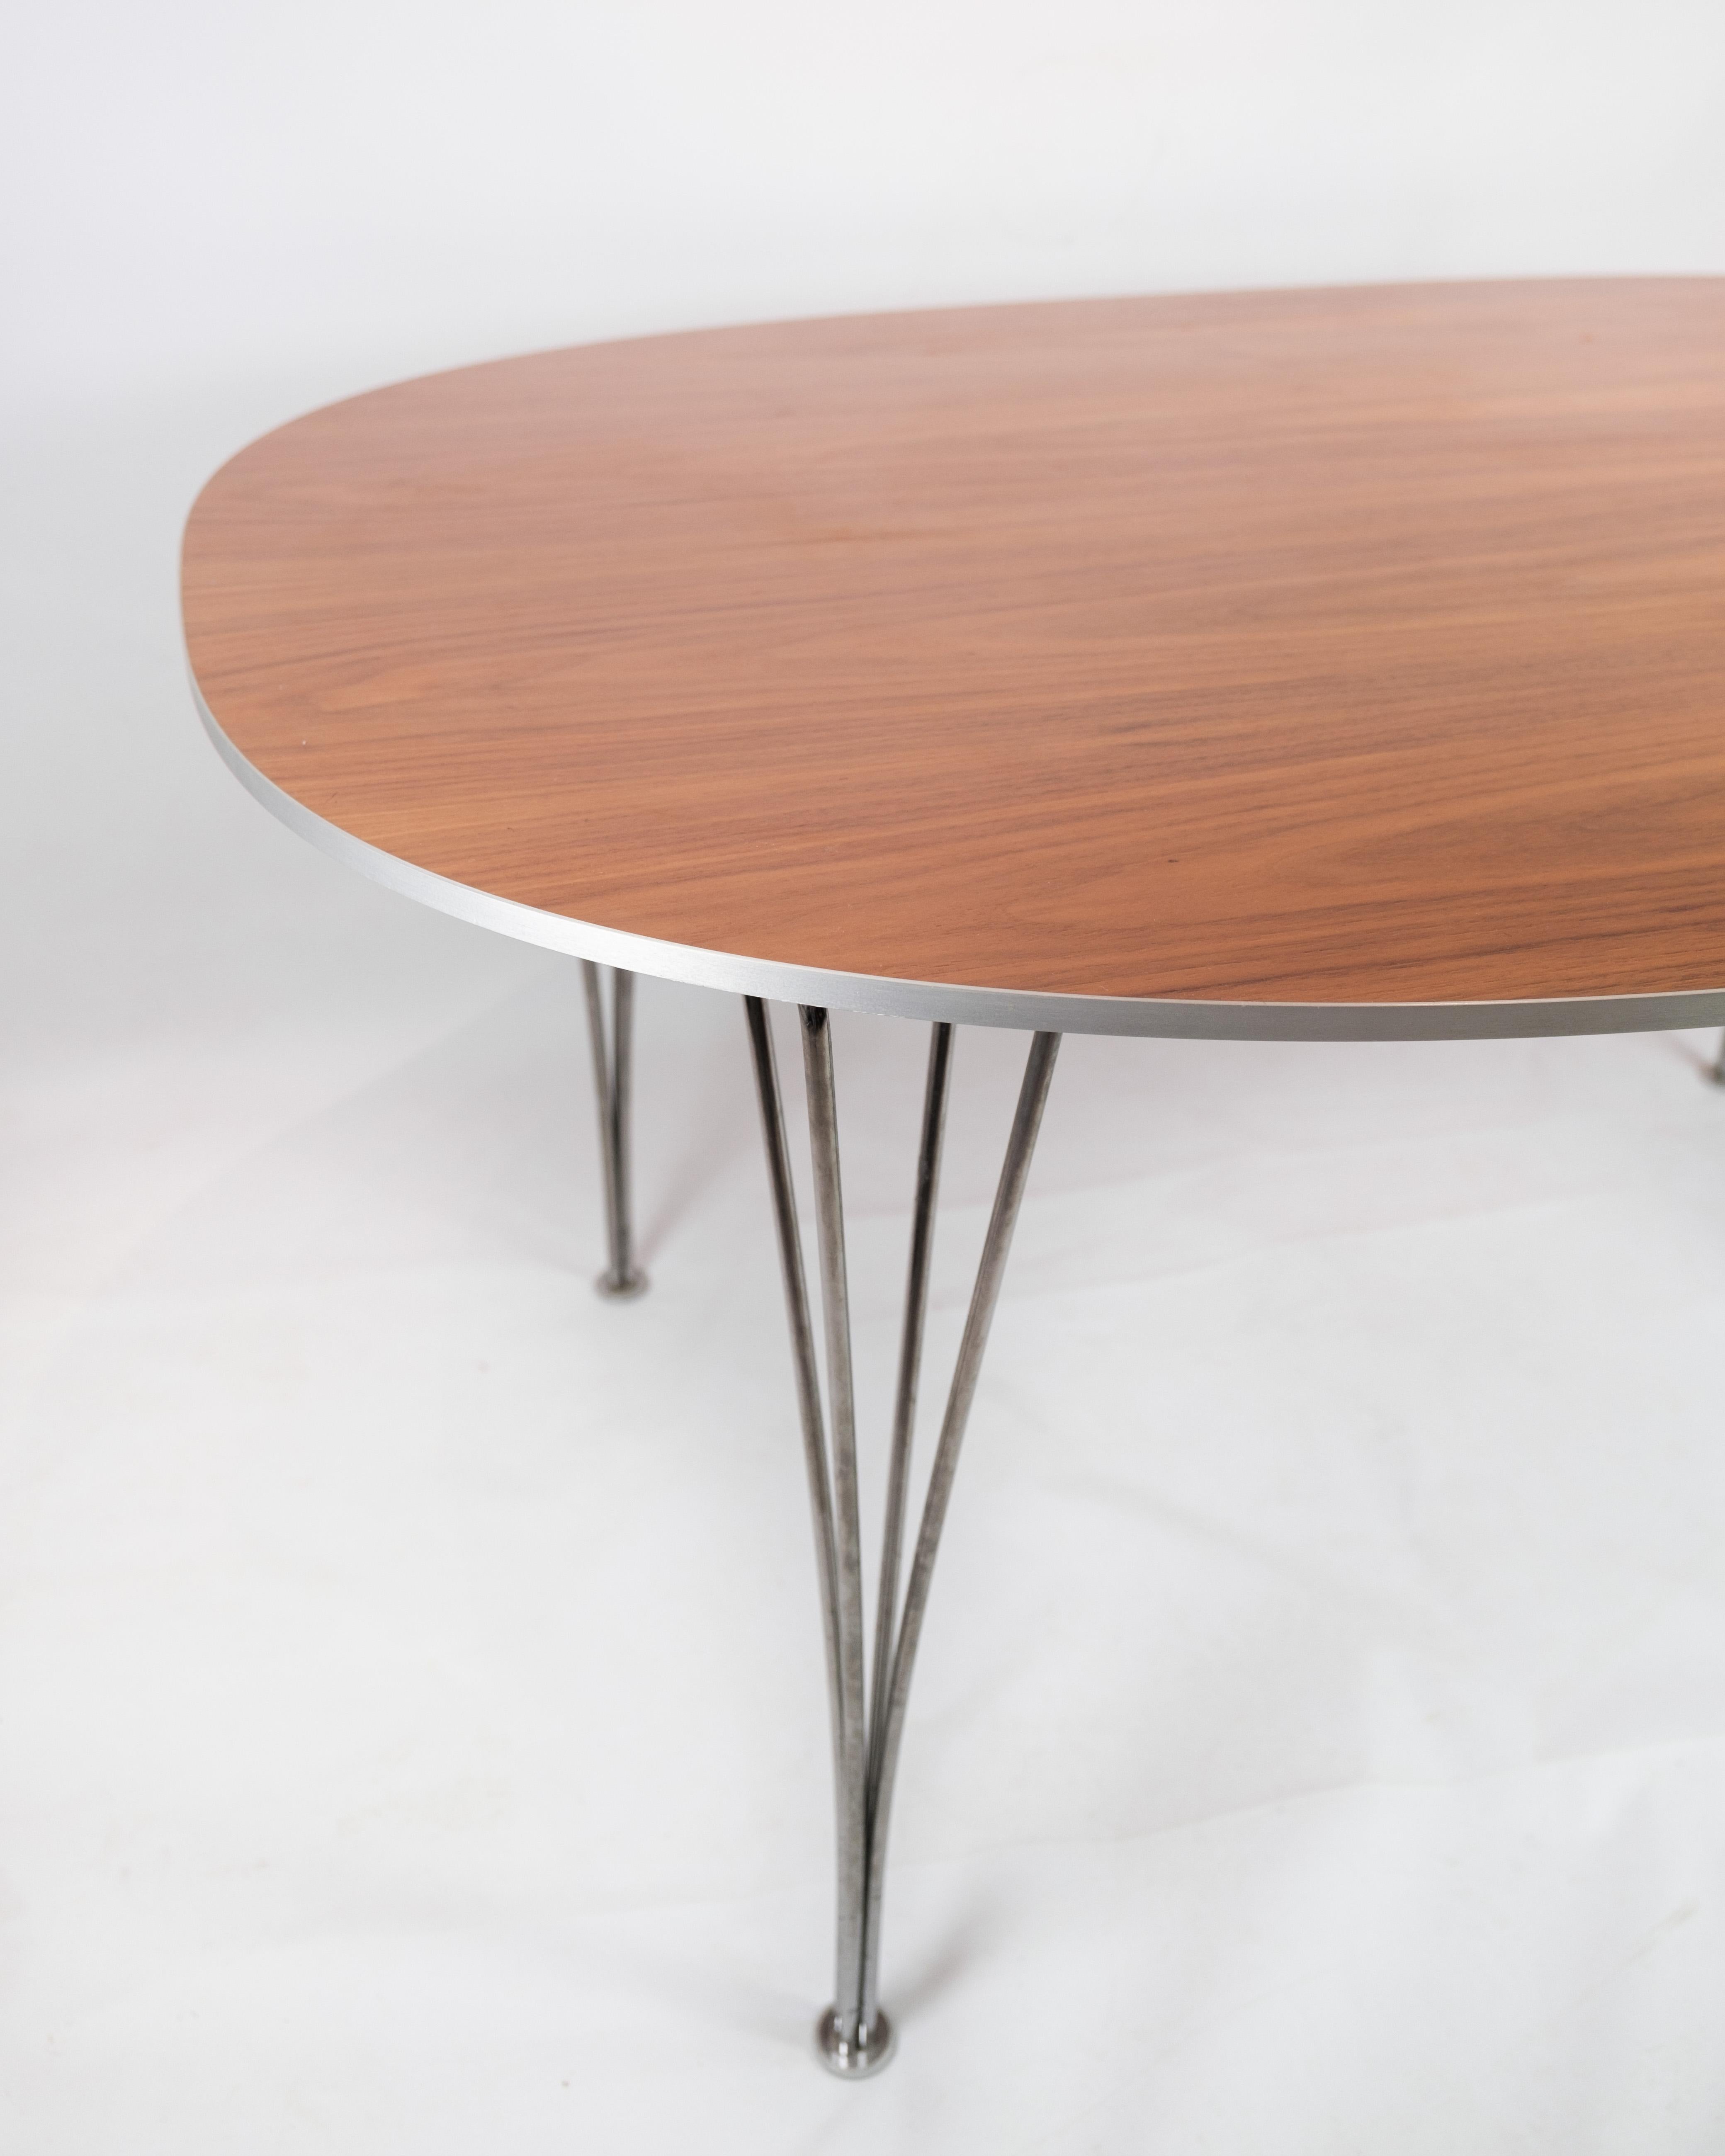 This table Piet Hein, Model B612 with walnut is a table designed based on carefully considered mathematical calculations, performed by Piet Hein. The super ellipse gives the table an oval shape and optimal utilization of the table. Since then, Piet